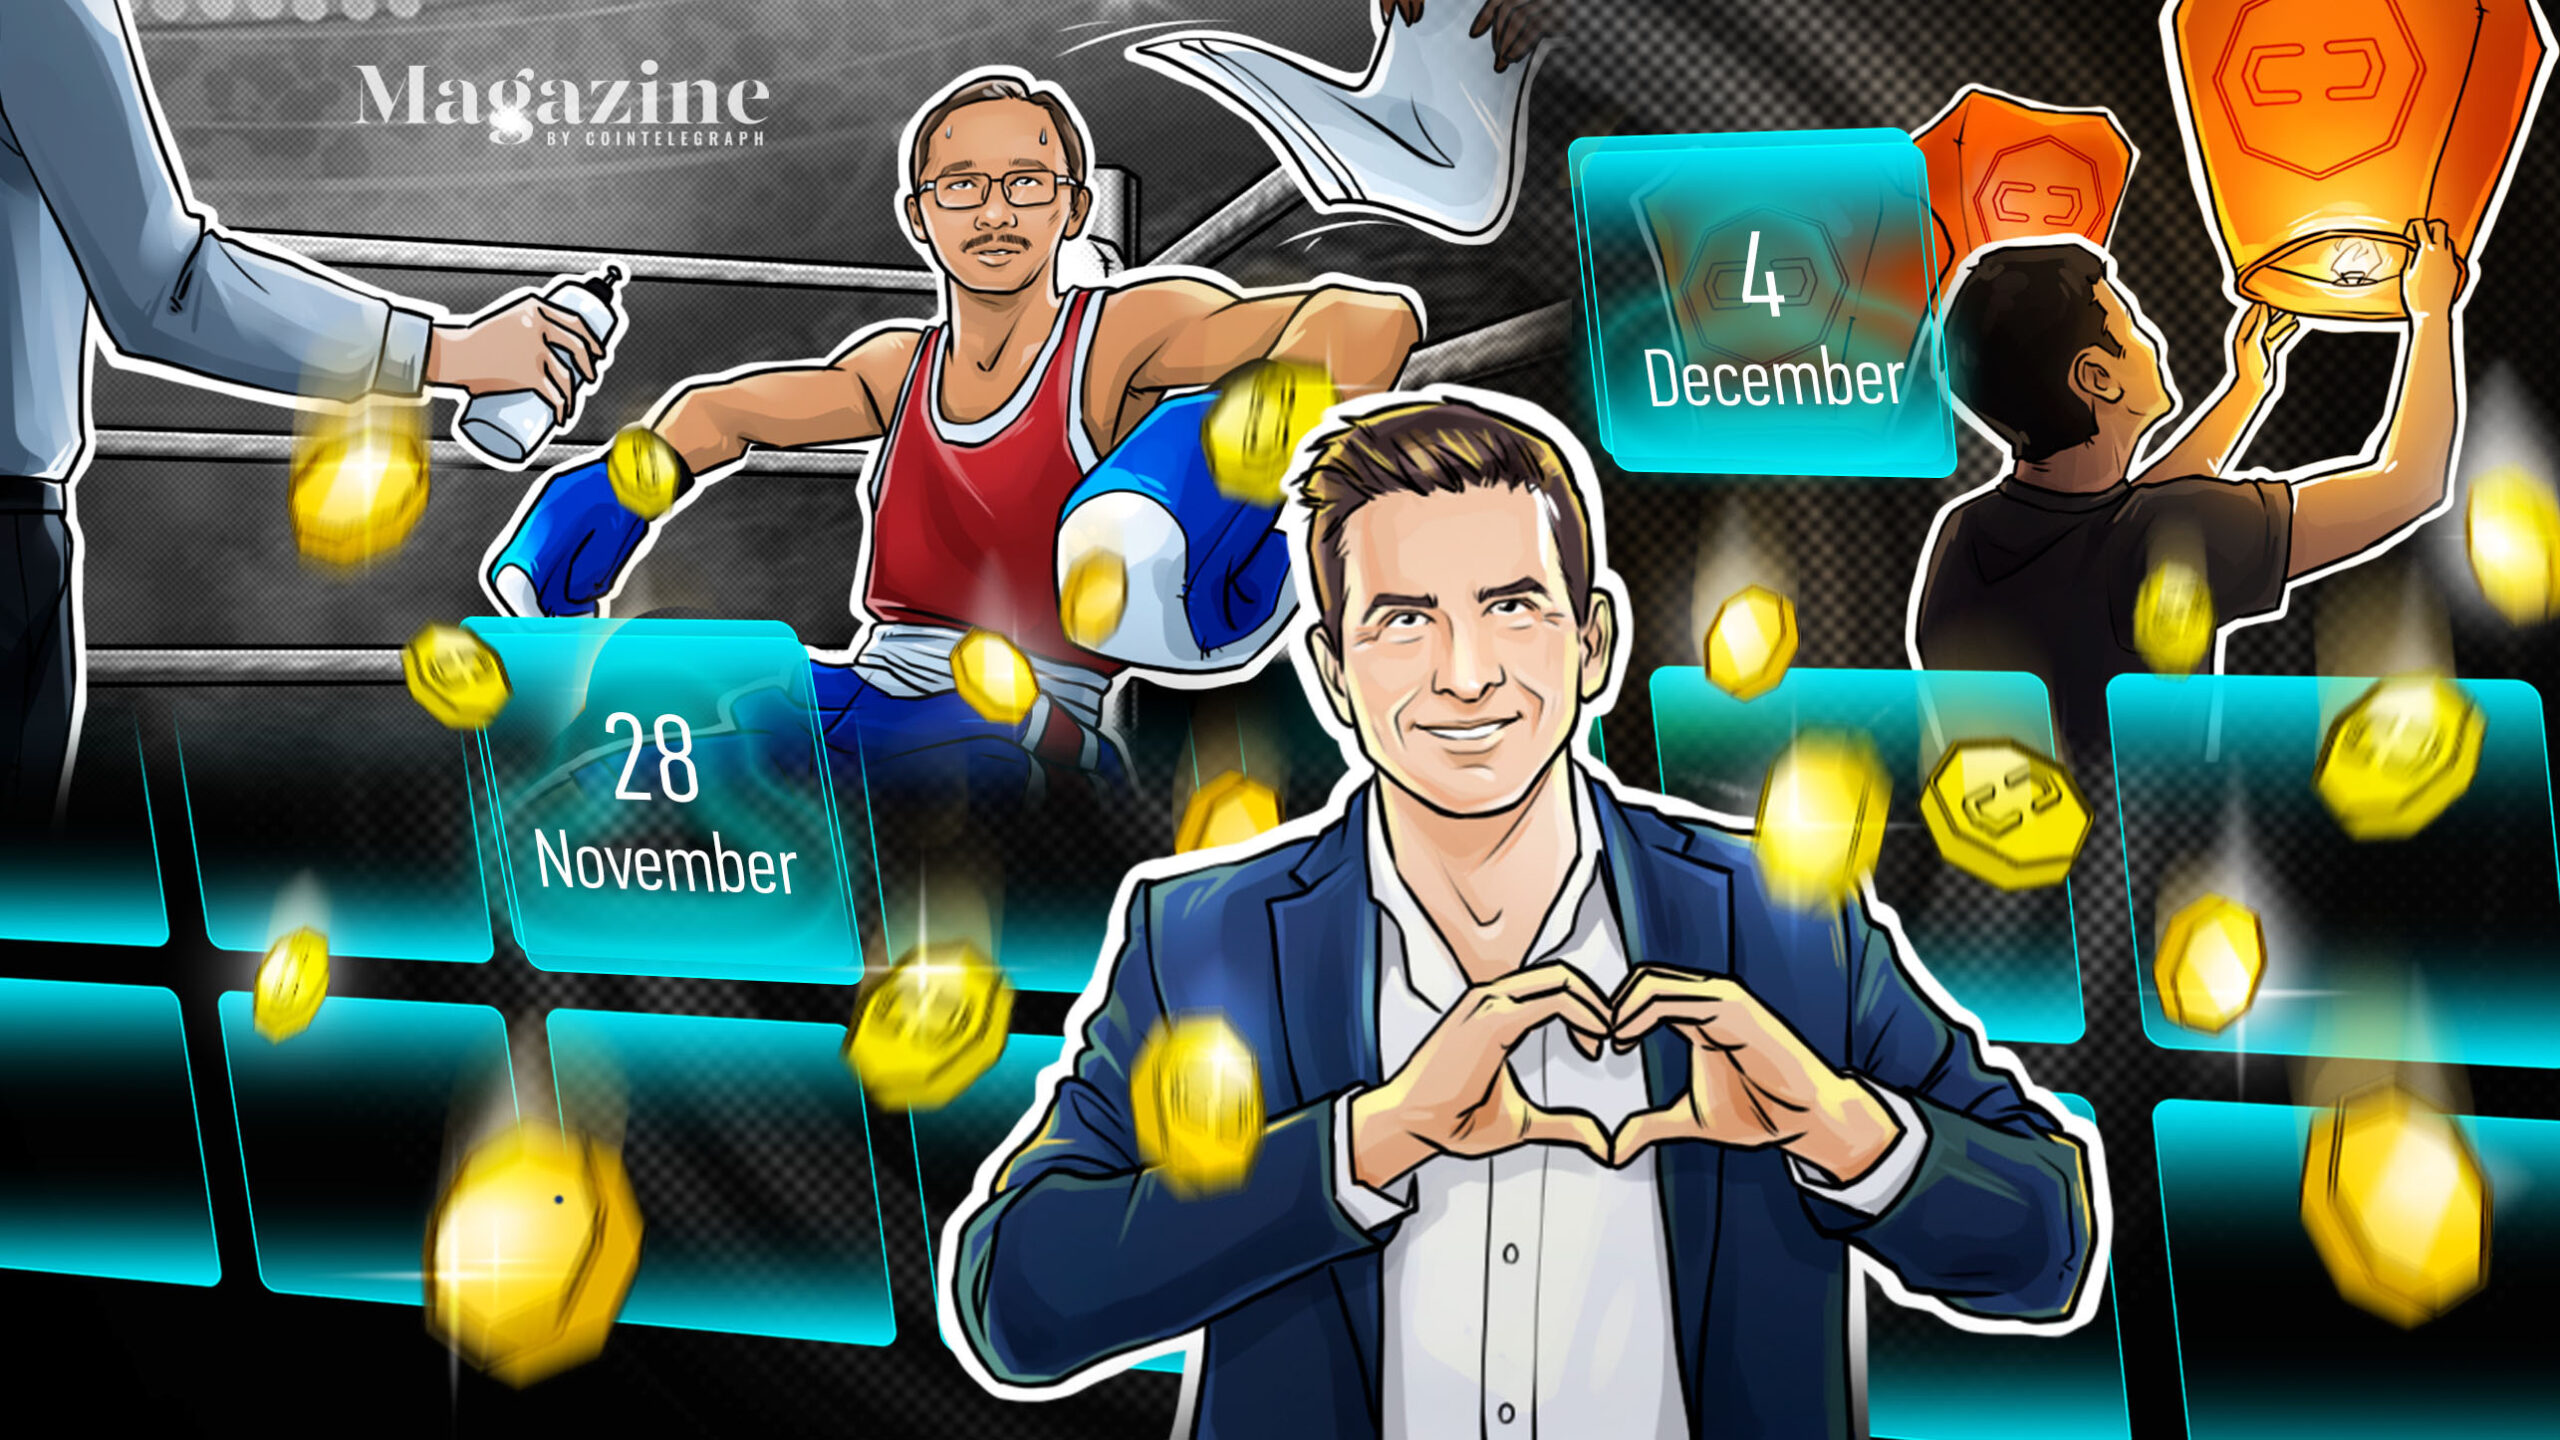 Vitalik-buterin-outlines-path-to-eth-20,-visa-launches-crypto-advisory,-biden’s-anti-crypto-nominee-for-comptroller-withdraws:-hodler’s-digest,-dec.-5-11